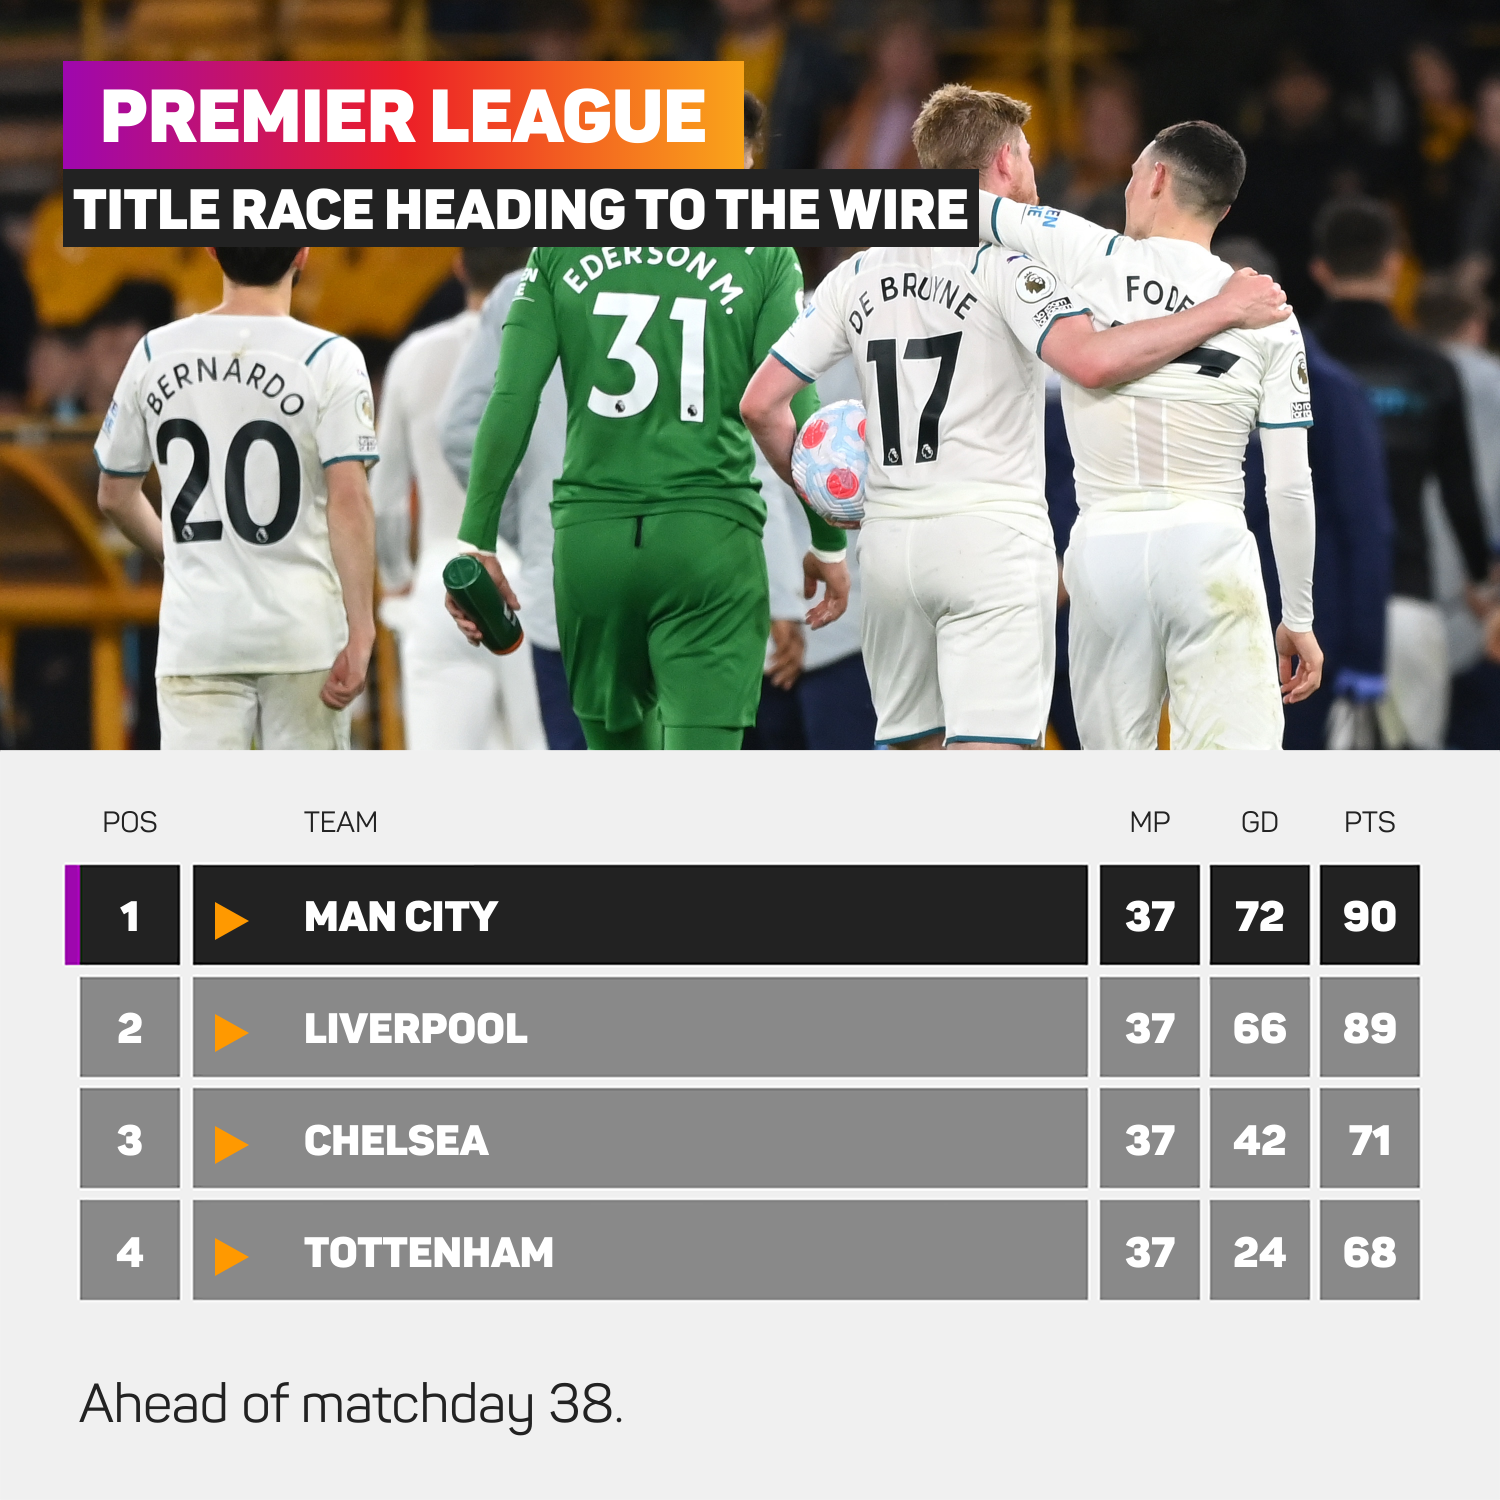 The Premier League title race is heading to the last day